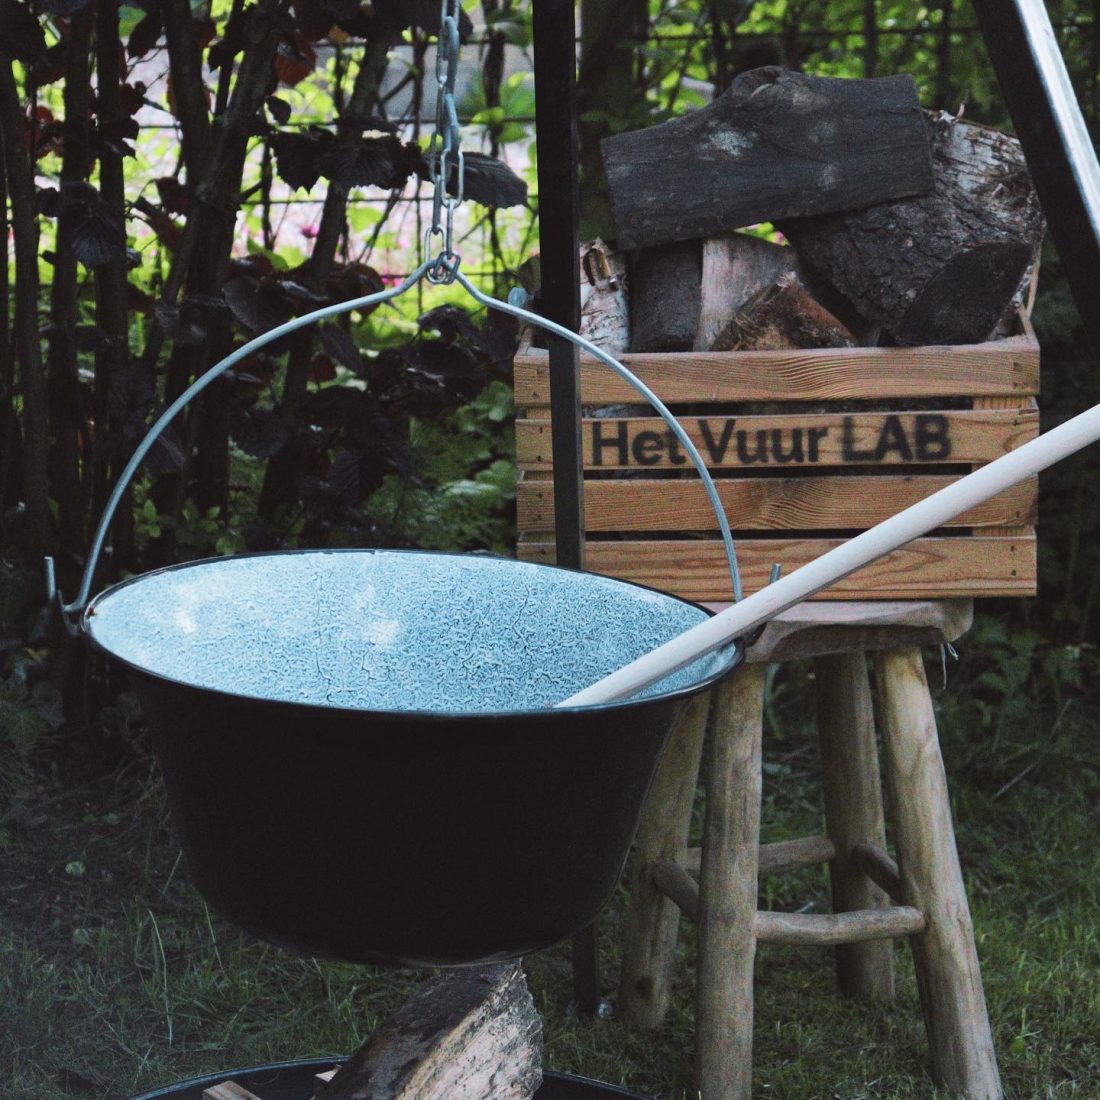 What will you cook in the witches' cauldron?